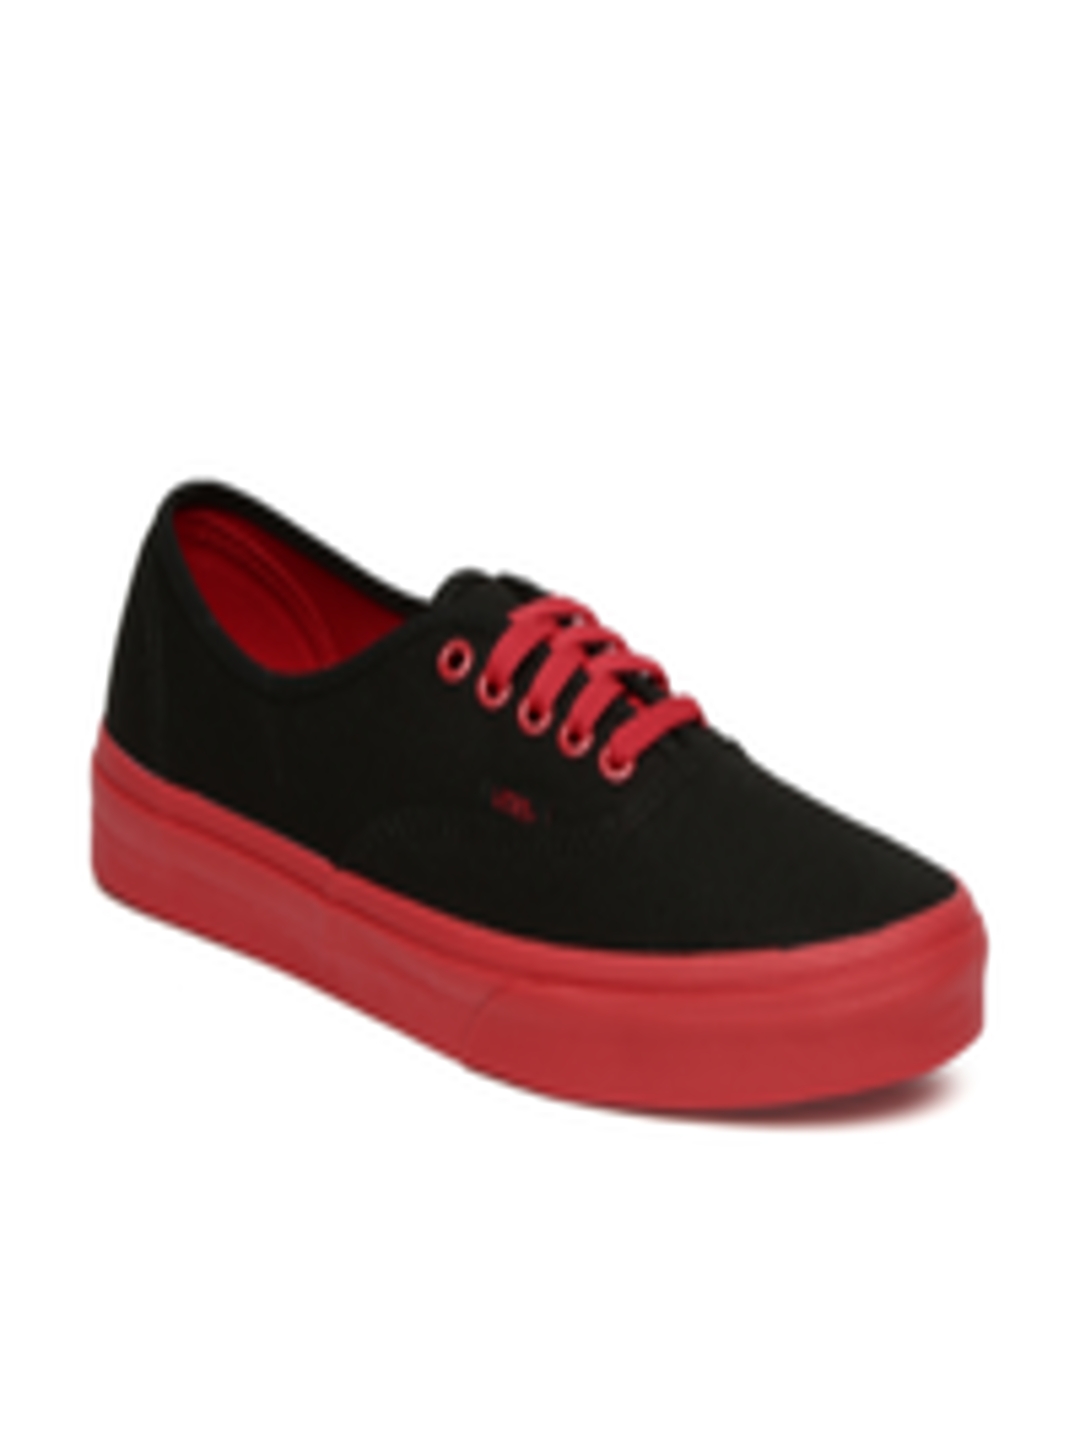 Buy Vans Unisex Black & Red Authentic Sneakers - Casual Shoes for